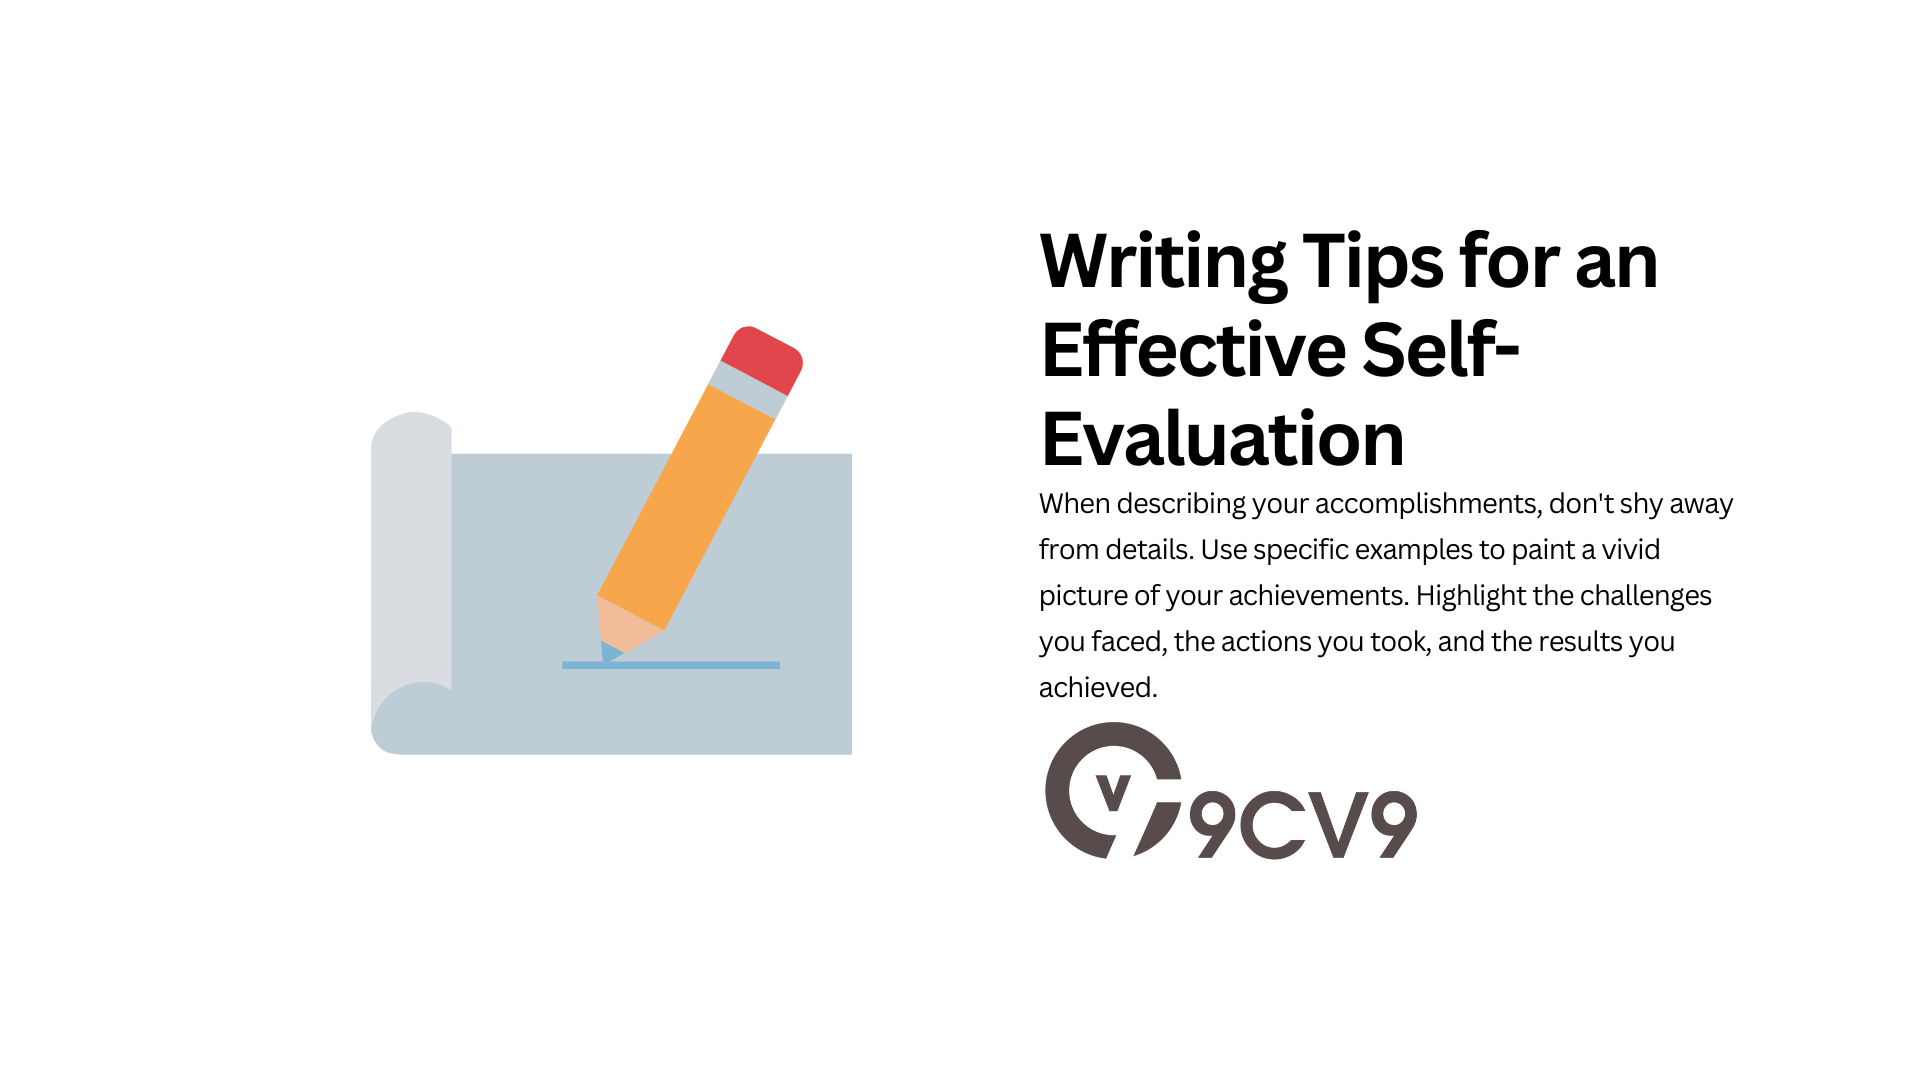 Writing Tips for an Effective Self-Evaluation